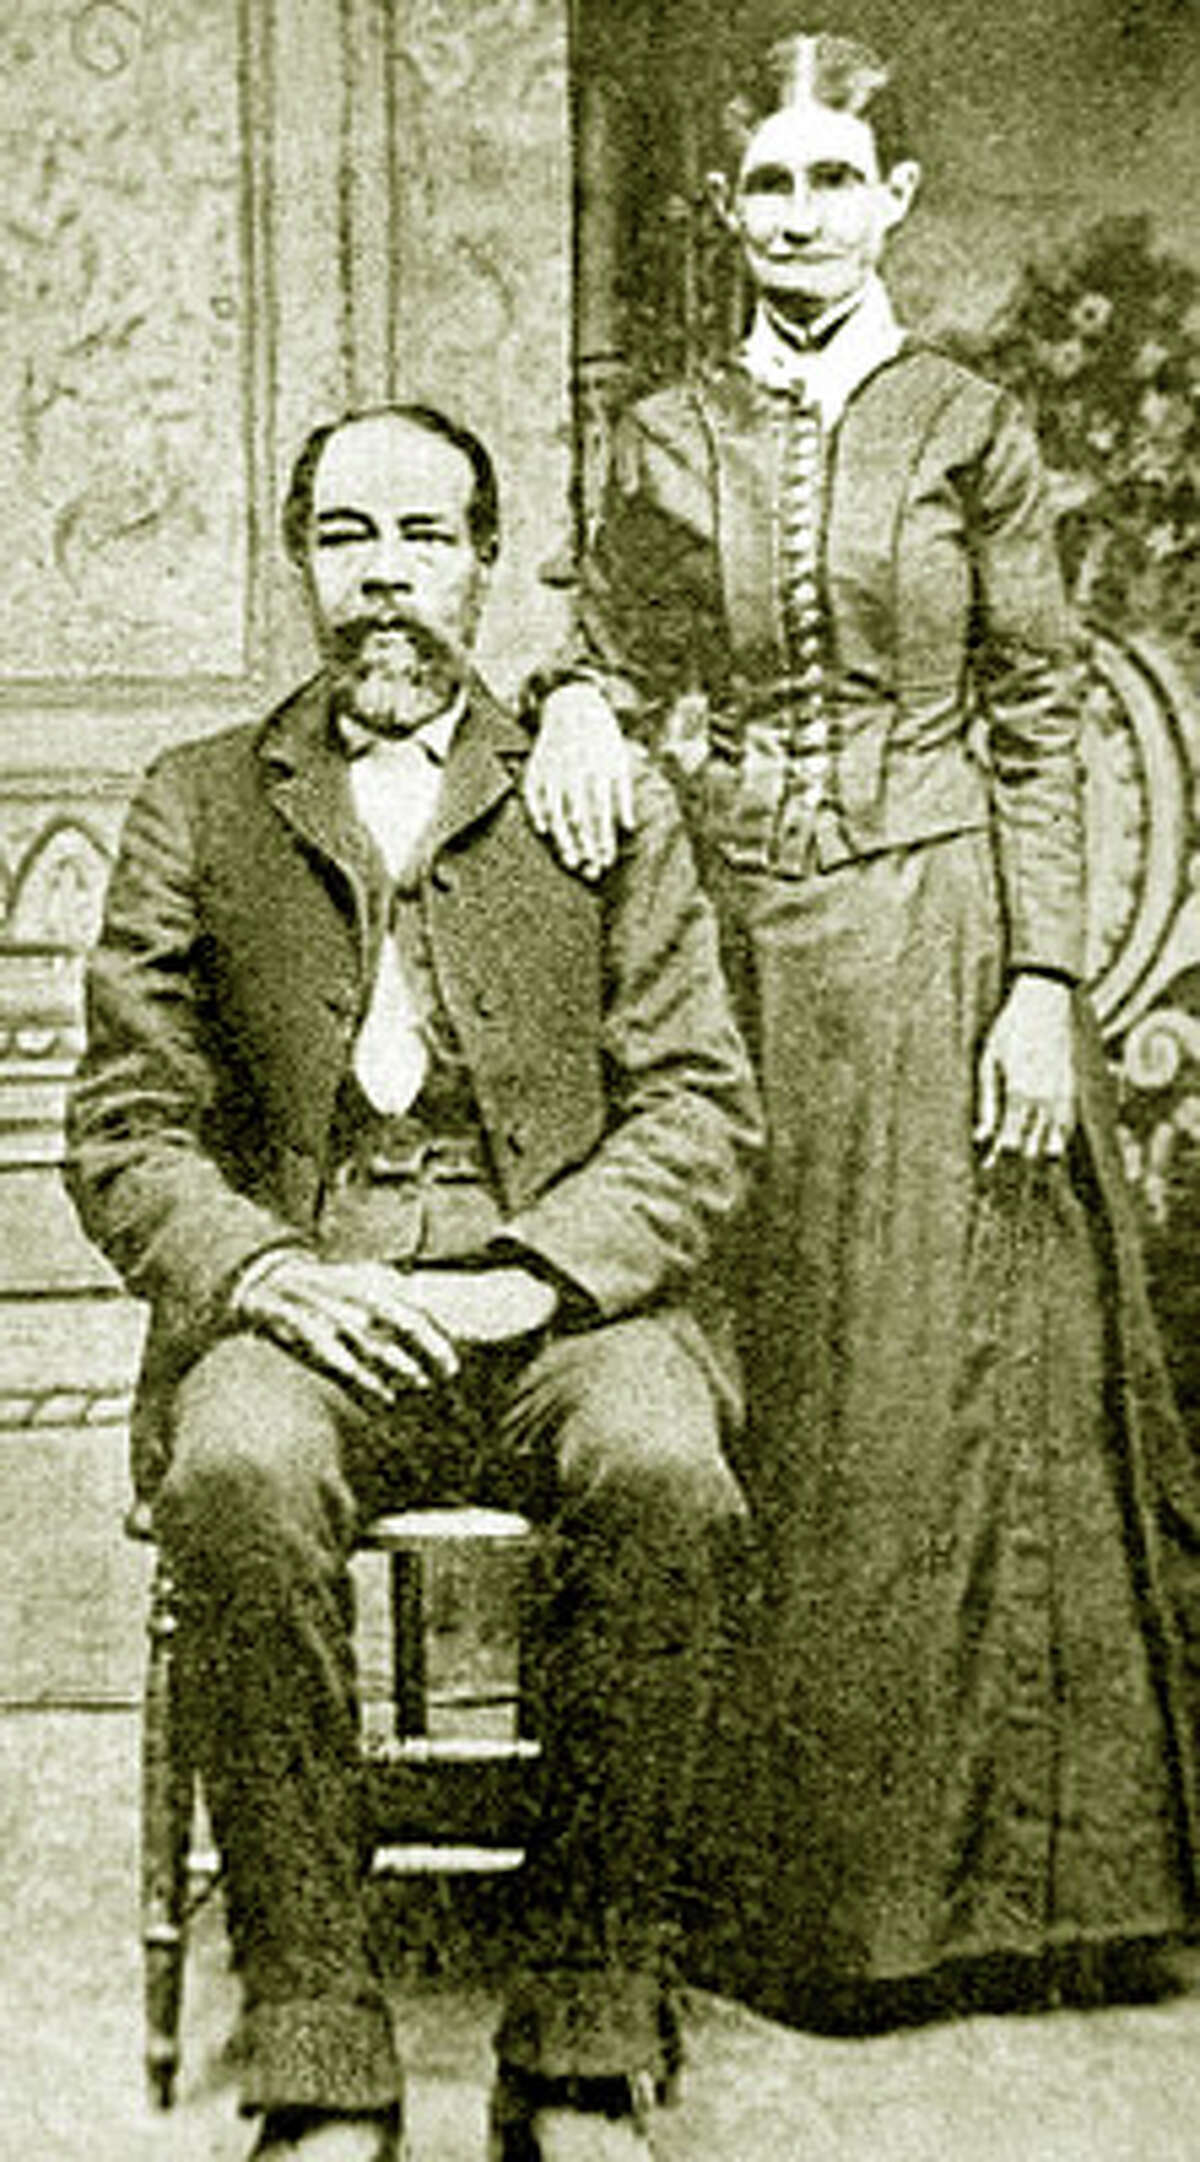 FORBIDDEN LOVE: Isaac Berry (left), who was born a slave, and Lucy Millard (right), the daughter of a Mormon minister, met in Missouri in the early 1800s. They fell in love and ran away to Canada to get married in 1859. The couple moved to Morton Township, Mich., in 1877, where they created the area that now is School Section Lake Veteran's Park. (Courtesy photo)